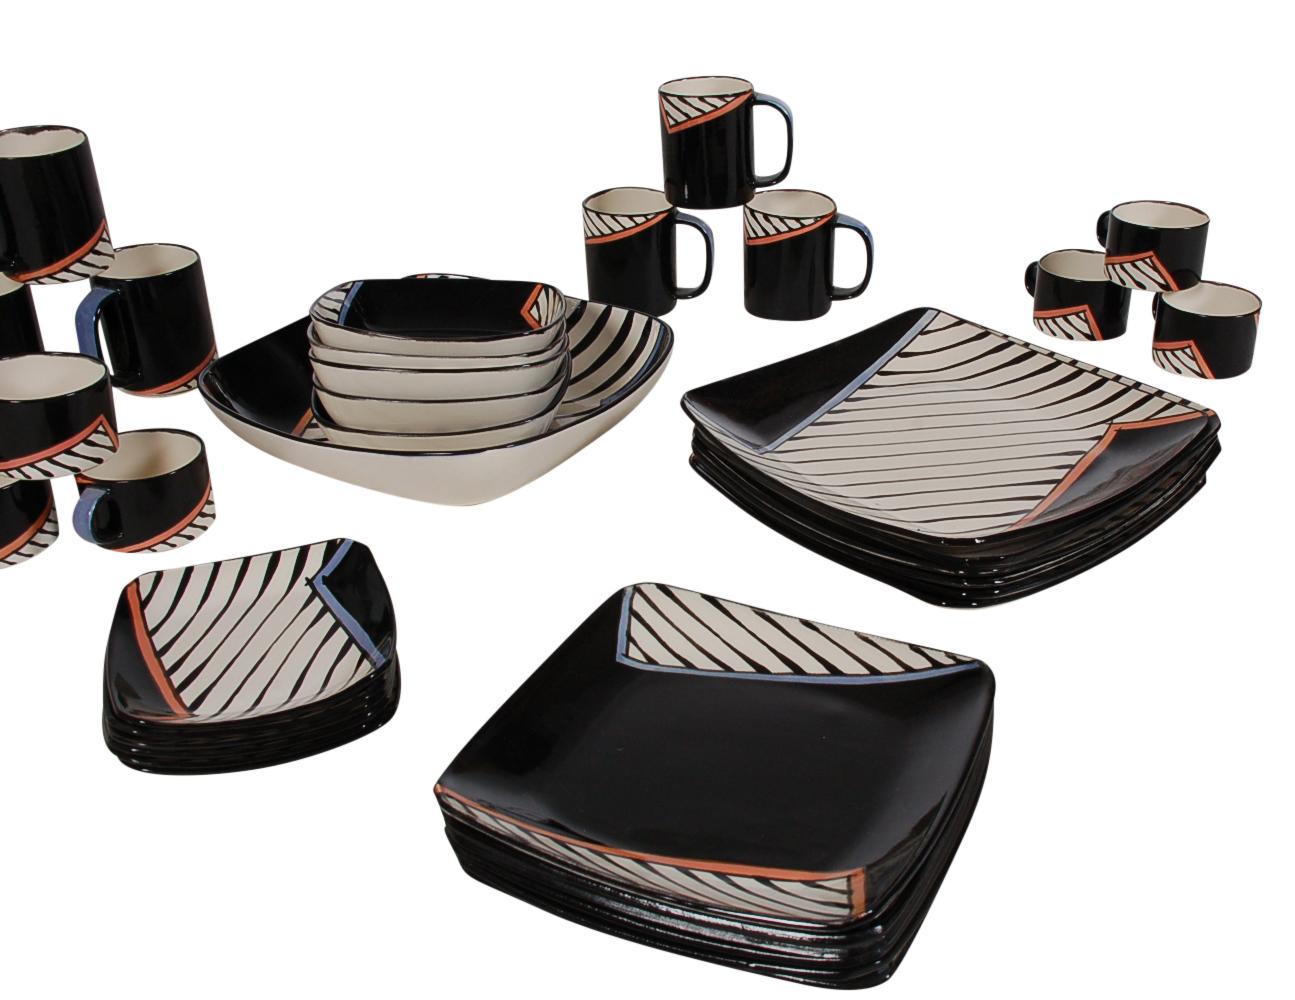 A large set of handmade porcelain dinnerware and coffee / tea service designed by Dorothy Hafner for Tiffany & Co., 1982. The set is being sold as service for six minus one soup bowl. Includes 6 large dinner plates, 6 dessert plates, 6 bread plates,